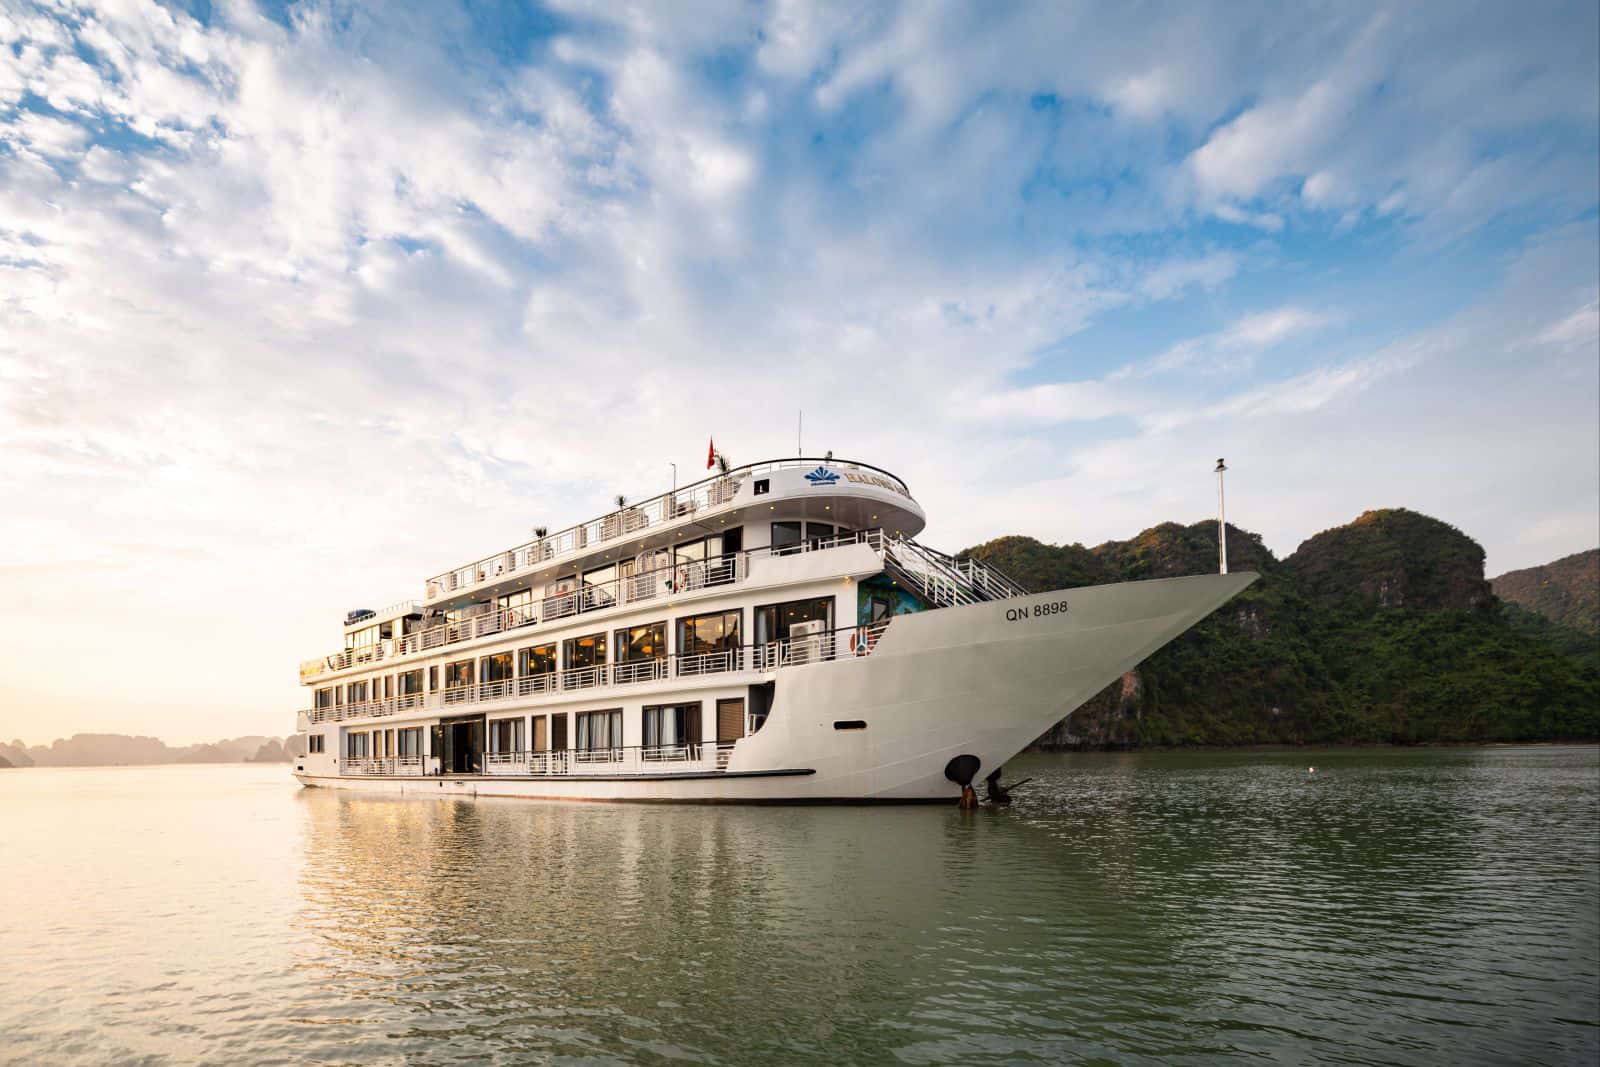 Cheapest months to cruise Halong Bay